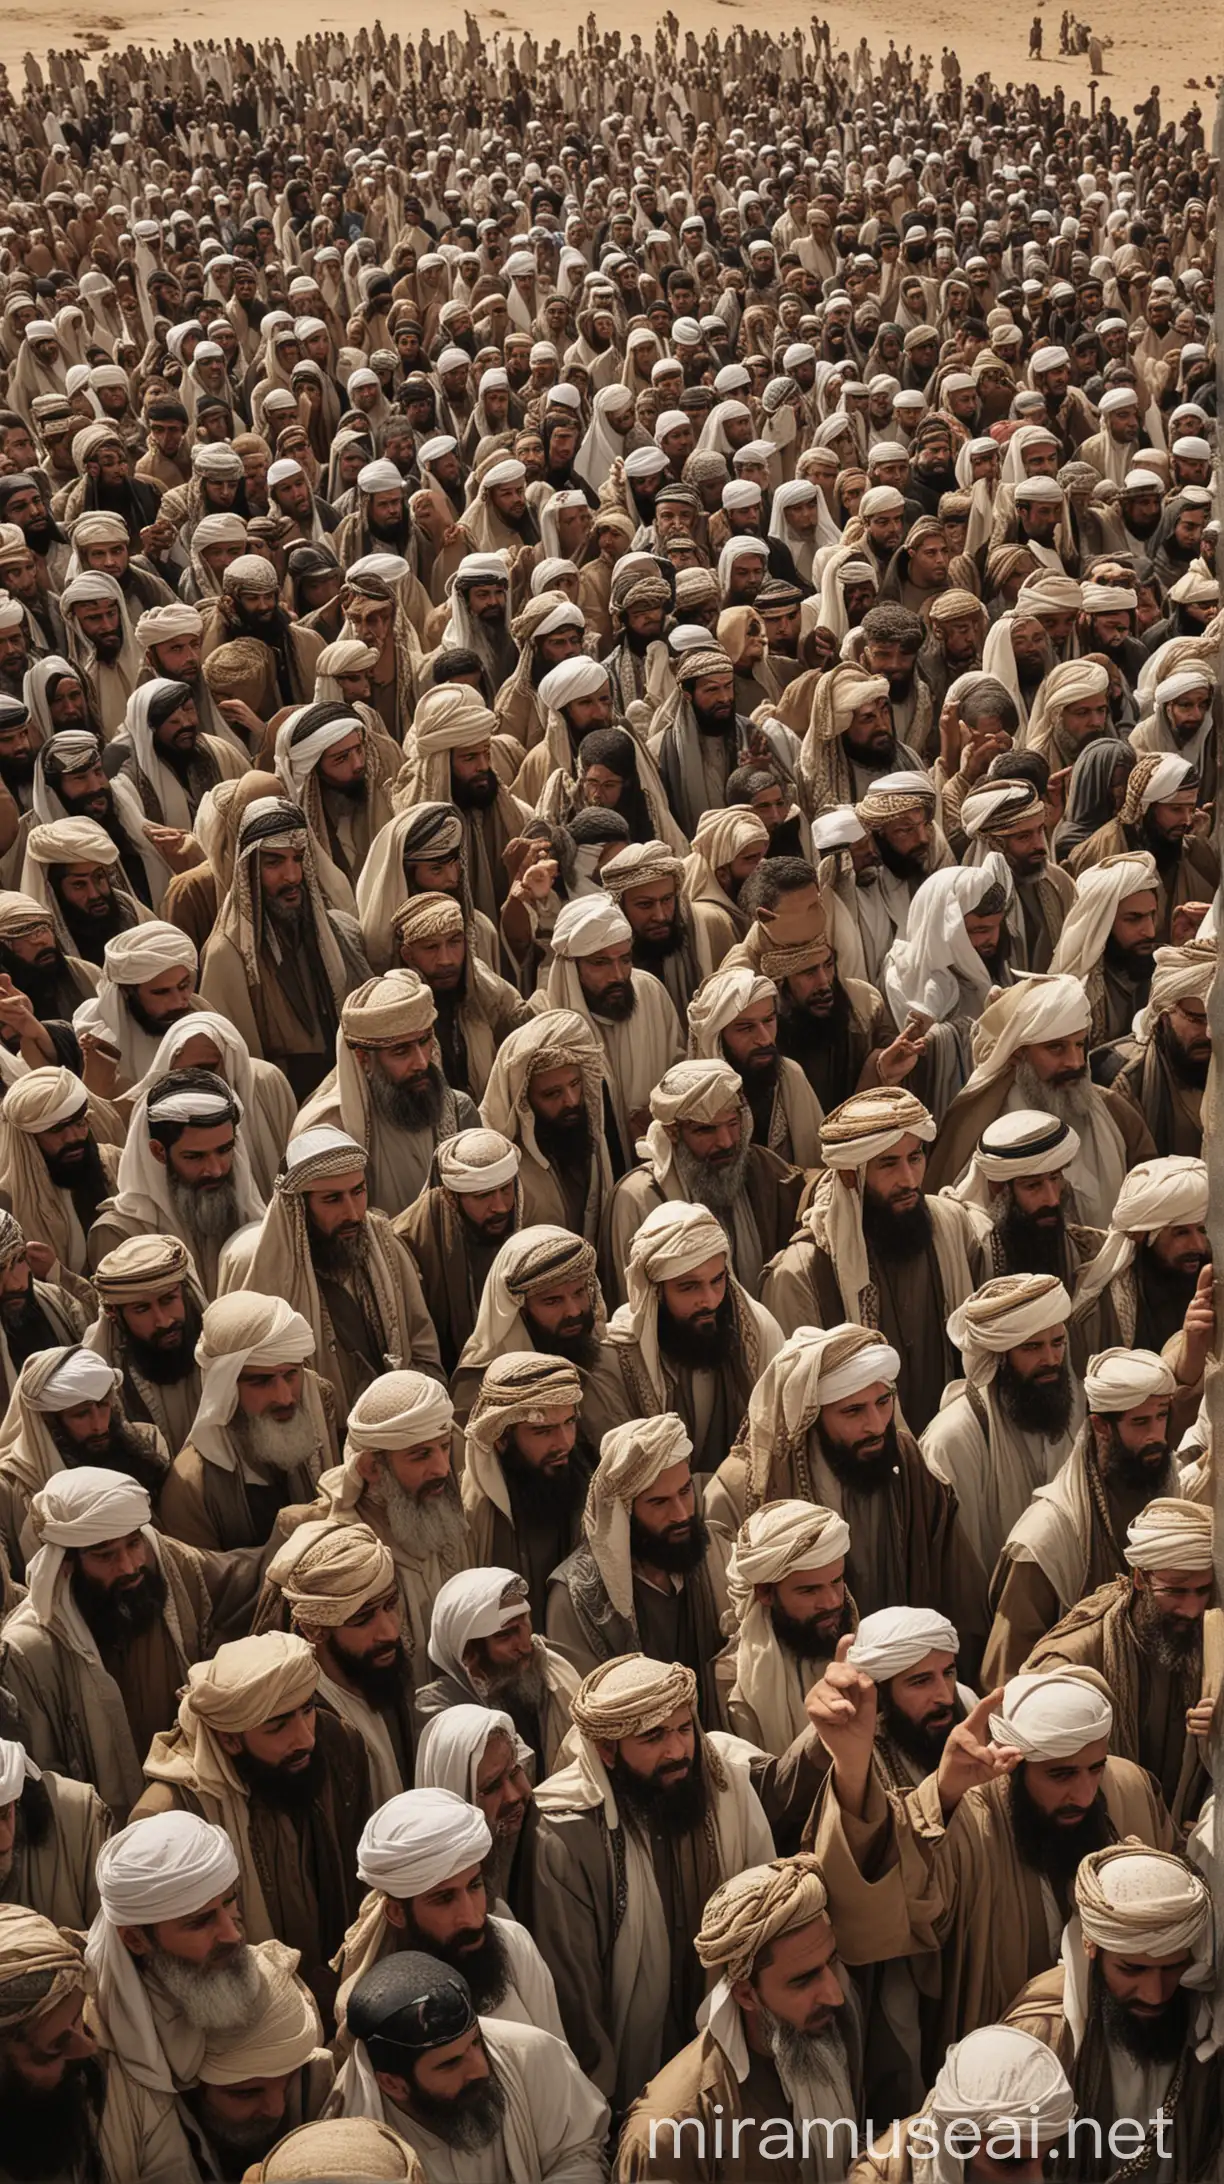 A gathering of Arab tribesmen, their faces stern with determination, as they pledge allegiance to Abu Bakr, the first Caliph after the passing of Prophet Muhammad (peace be upon him). The scene captures the pivotal moment when unity was forged amidst potential discord.

 islamic